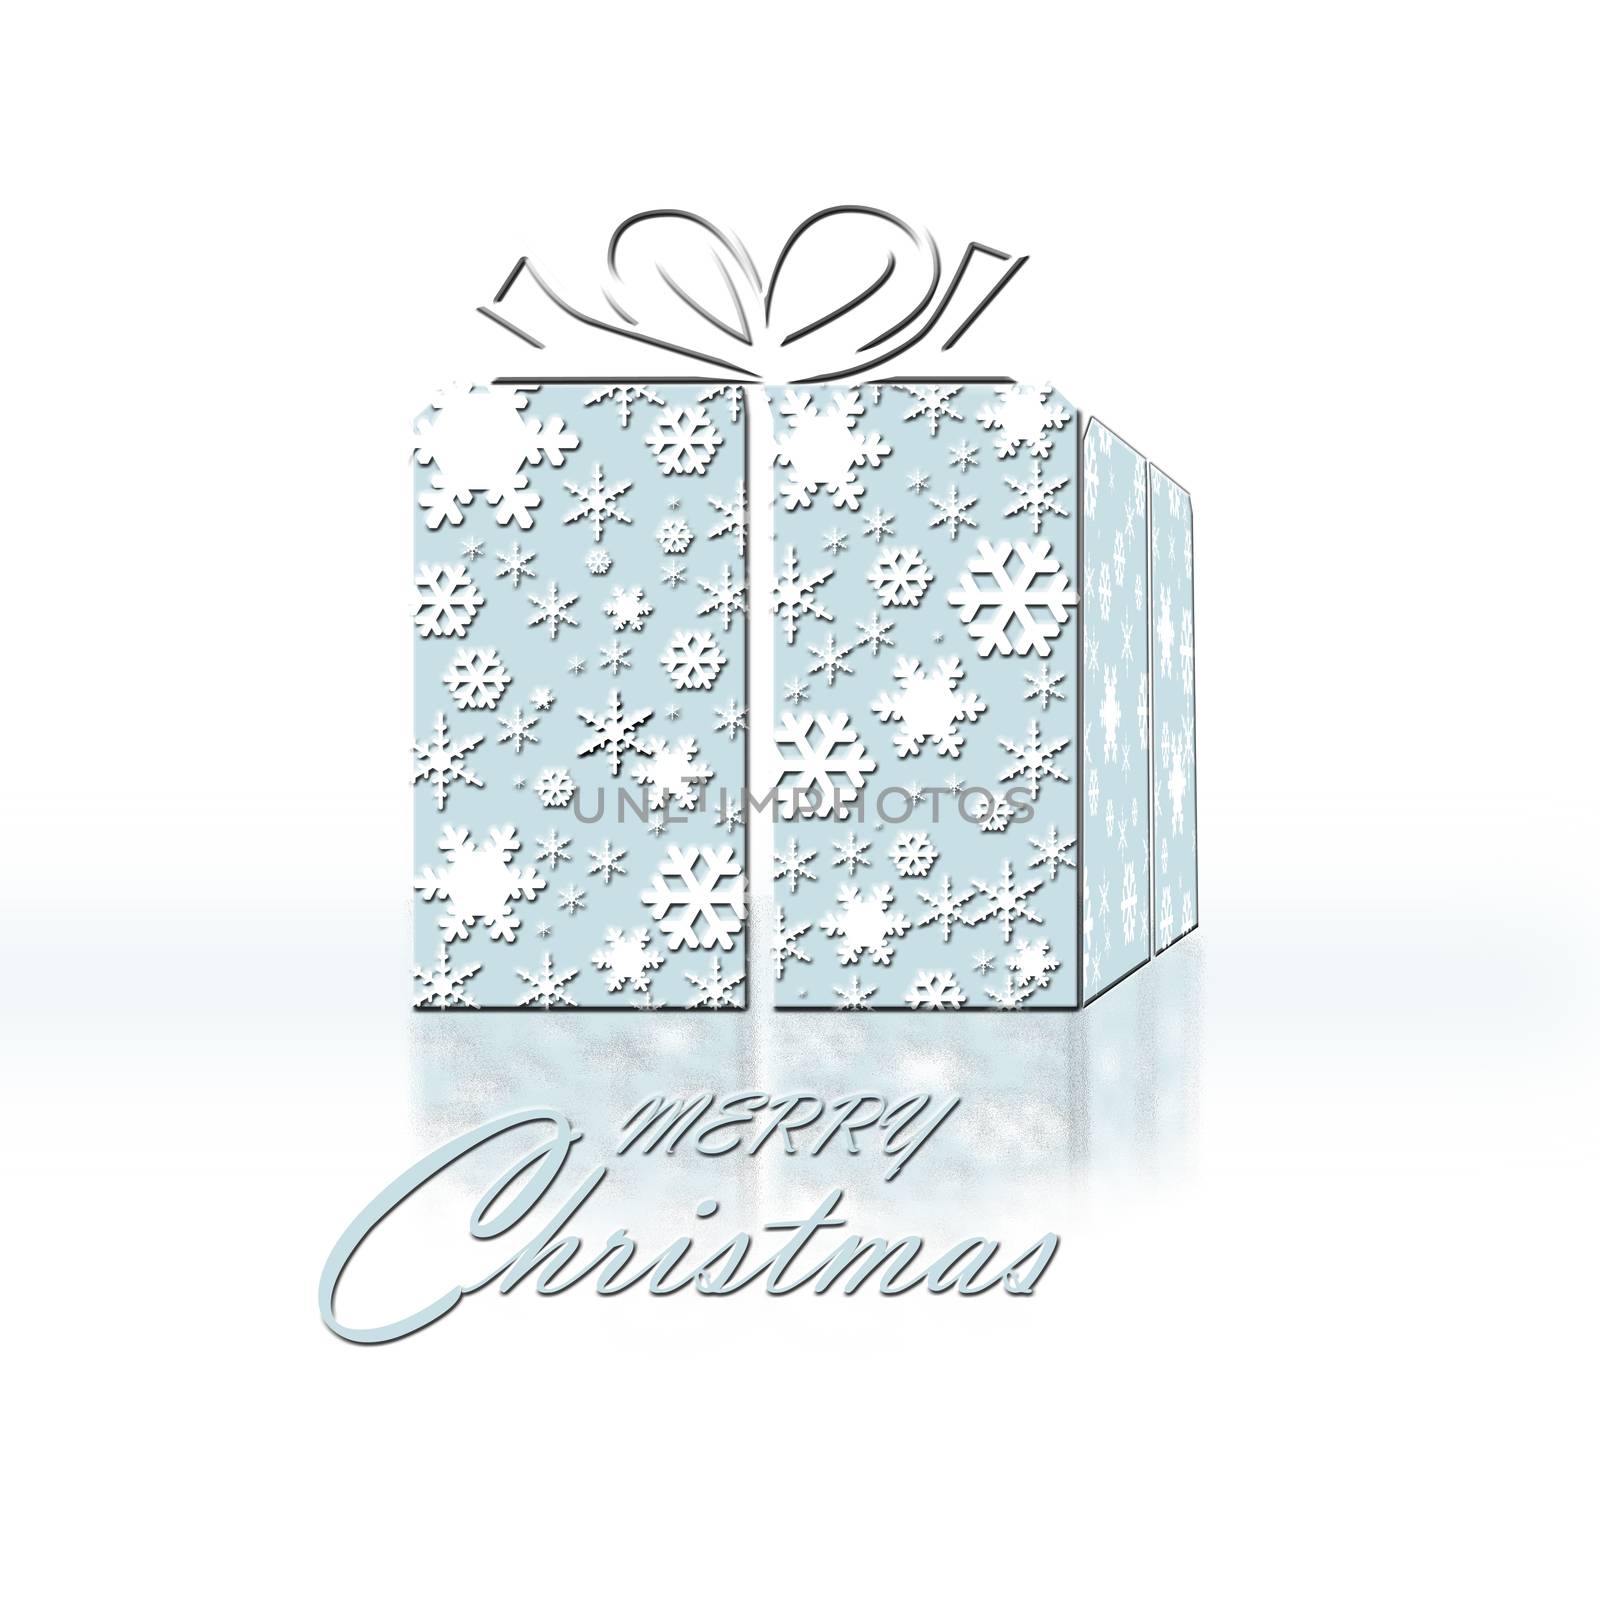 Elegant luxury Christmas background with abstract pastel light blue gift box made from snowflakes on white background with reflection. Text Merry Christmas. 3D illustration. Copy space, banner, poster